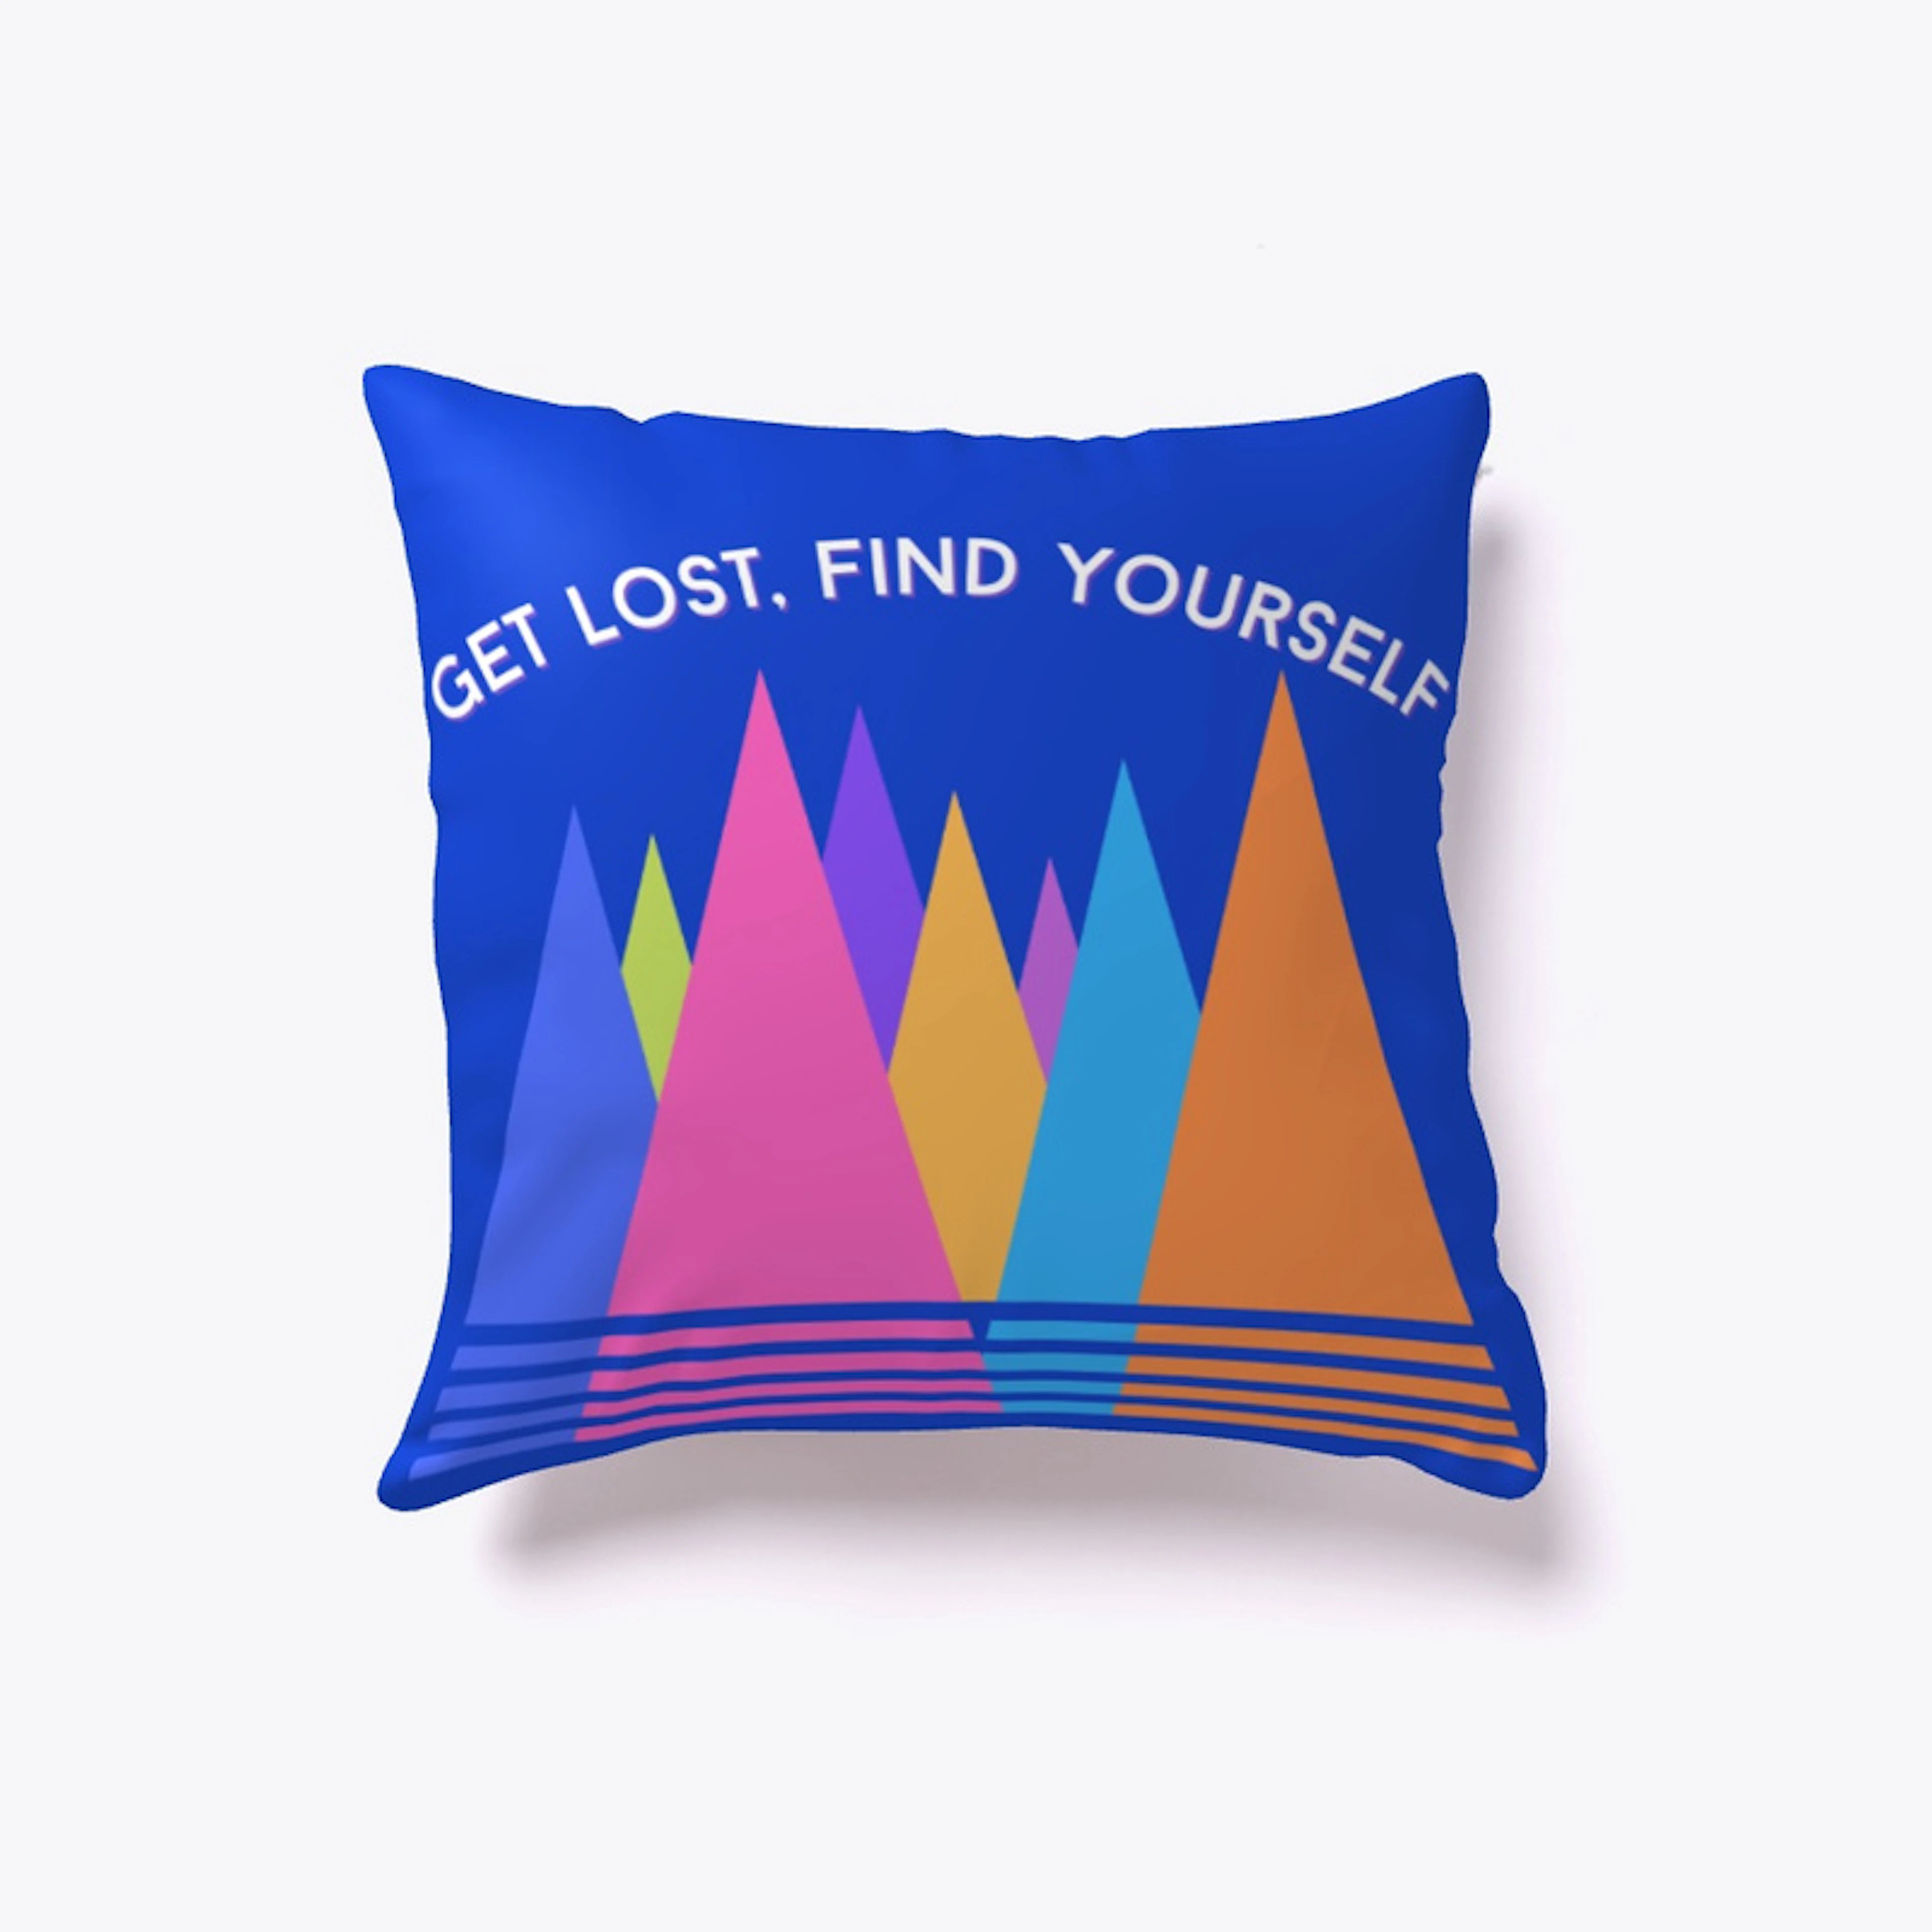 Get Lost, Find Yourself Pillow